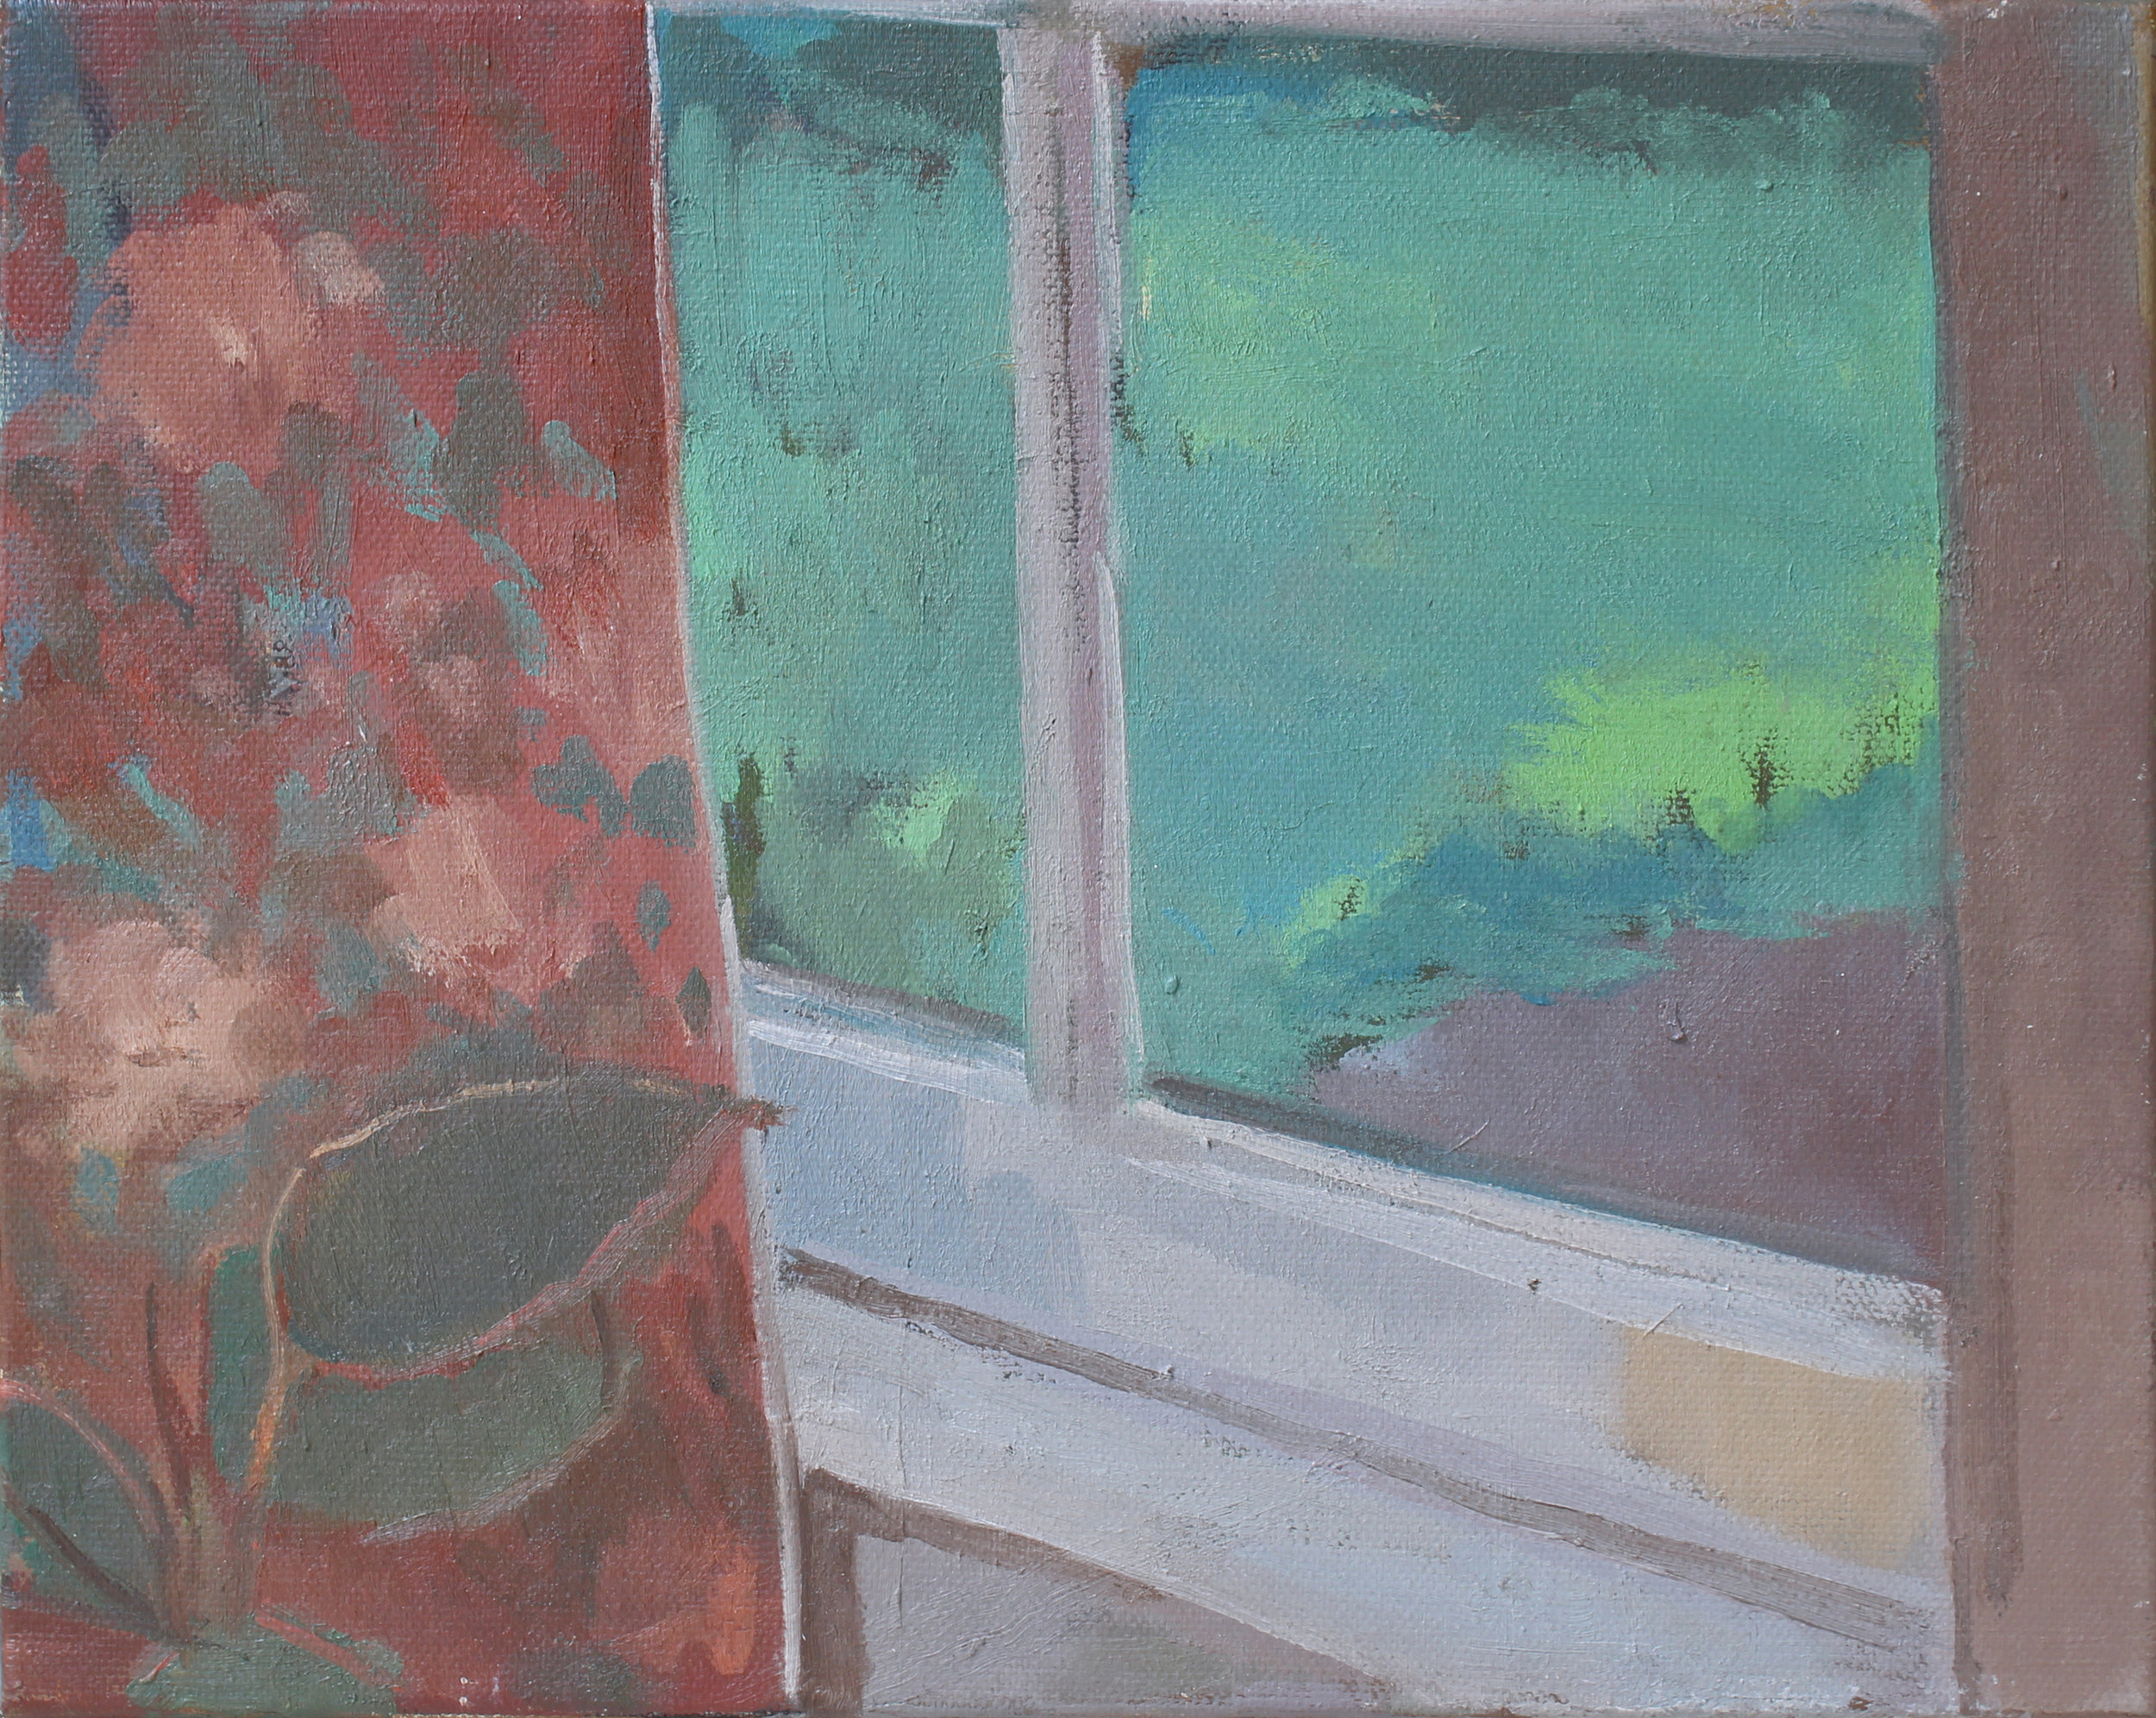    Window View in Late Spring   oil on canvas 8x10” 2015  collection of the artist 